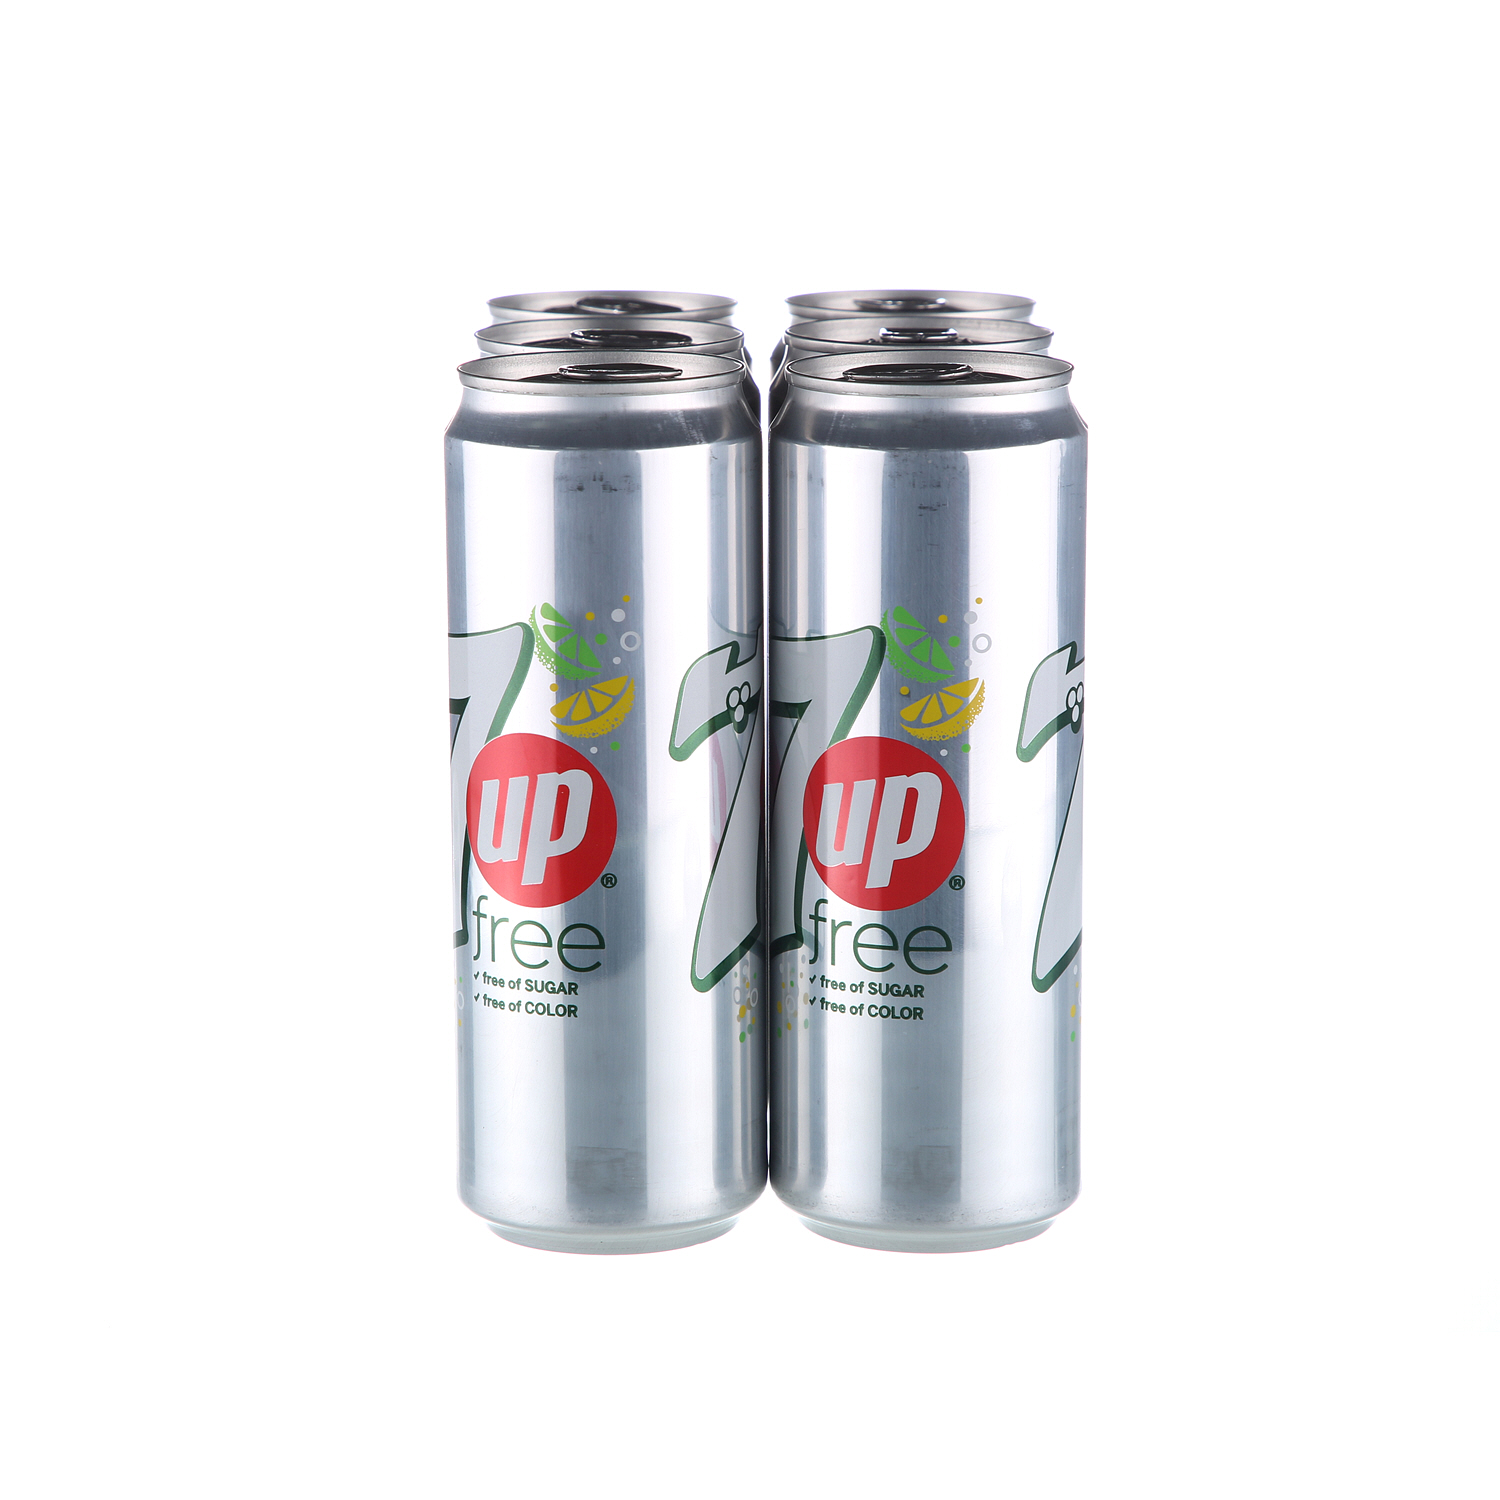 7UP Free Can 355ml × 6'S